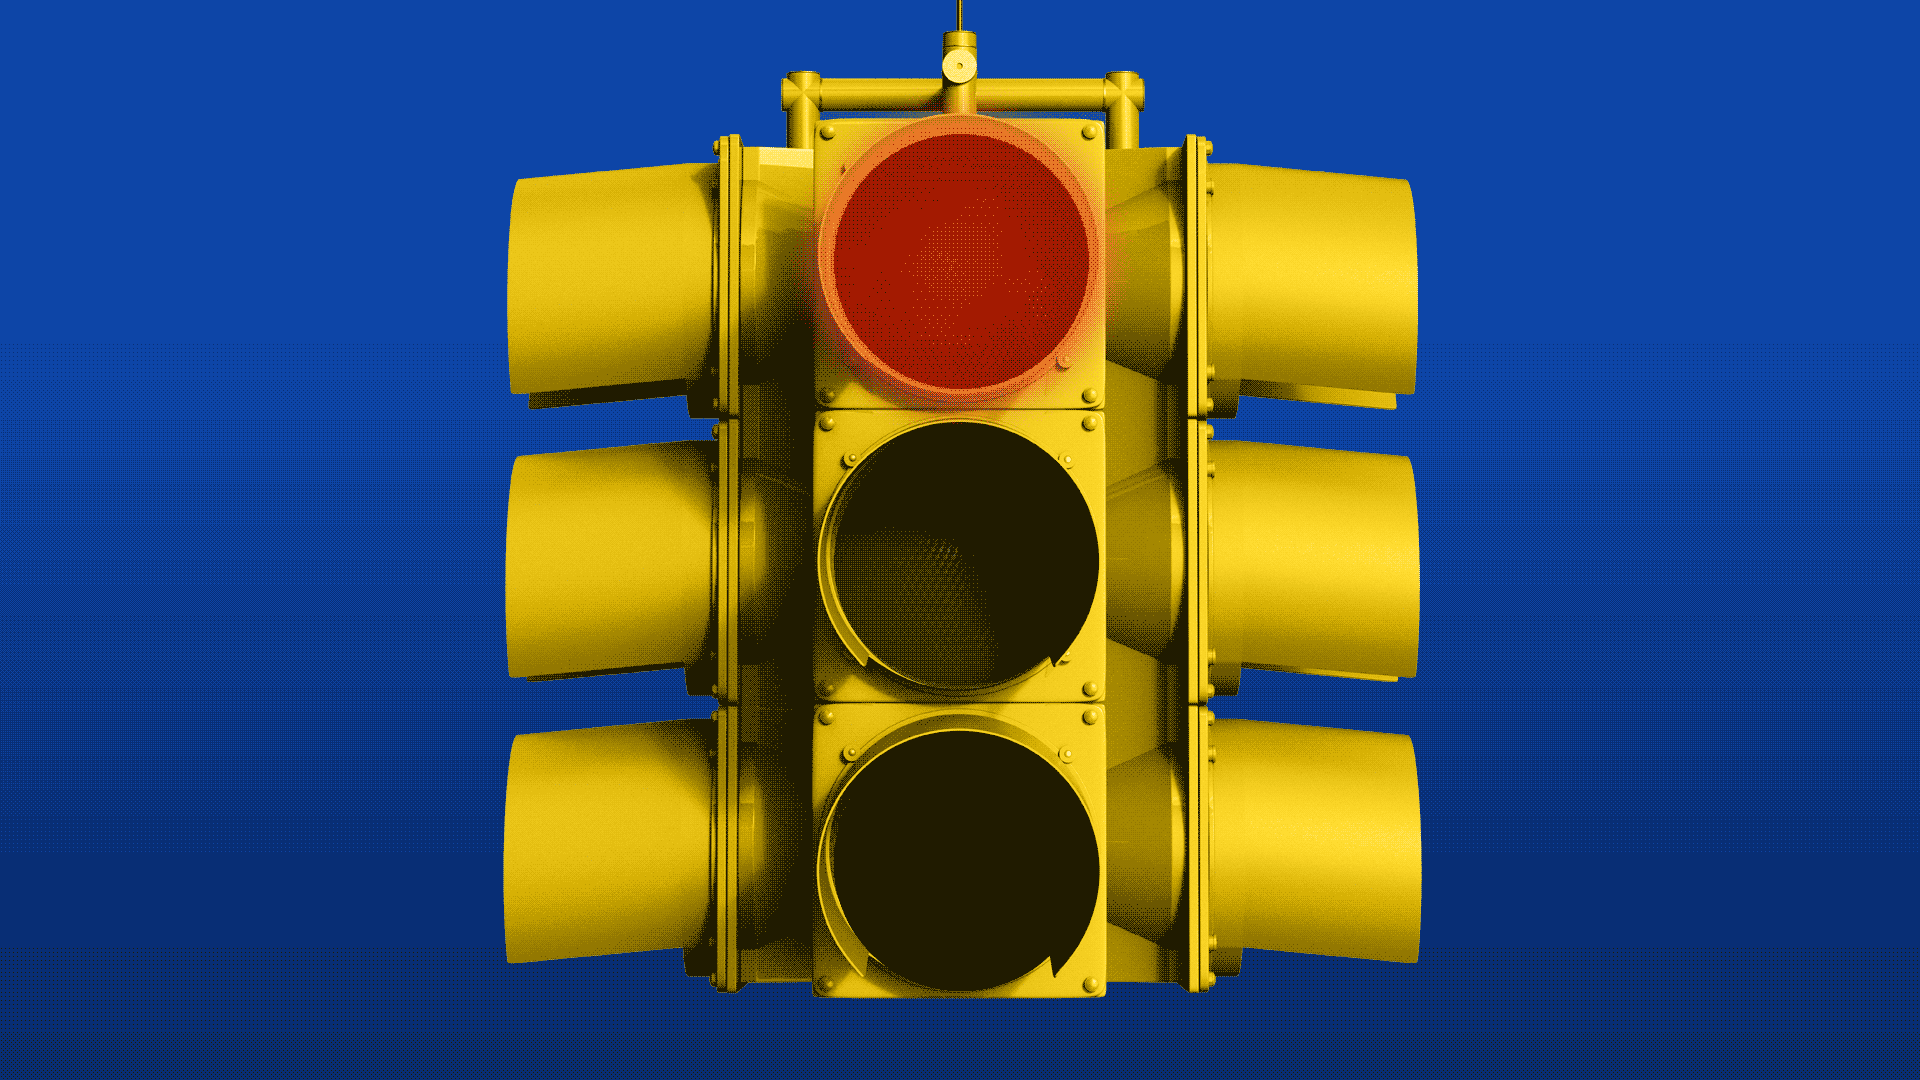 Animated GIF of a stoplight moving through red, yellow, and green, with the green light appearing as a basketball